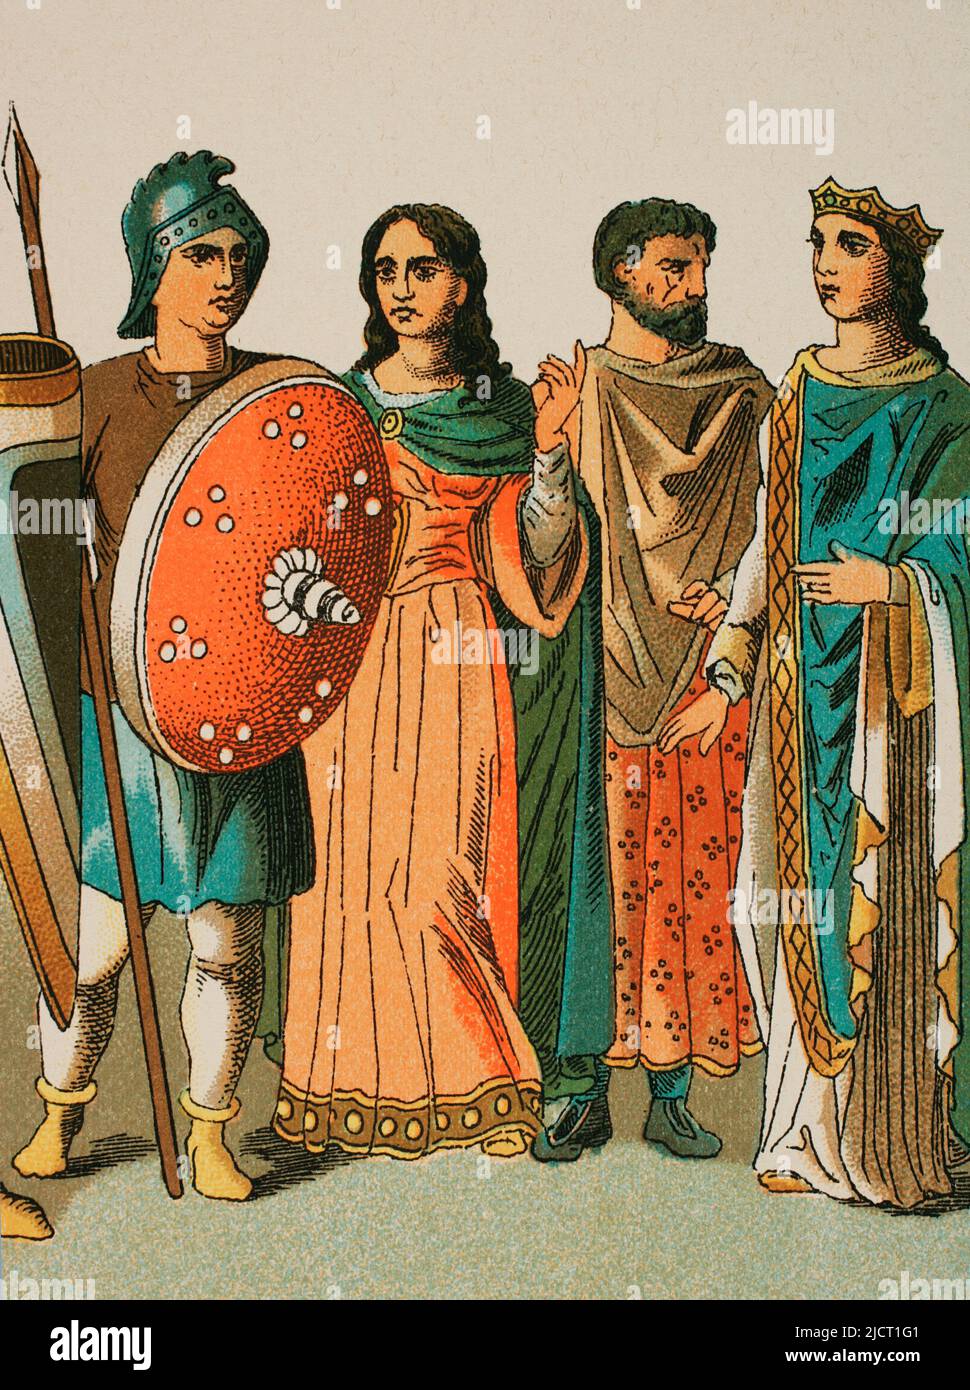 Middle Ages. France (year 900). From left to right: warrior, lady, nobleman and princess. Chromolithography. 'Historia Universal' (Universal History), by César Cantú. Volume IV. Published in Barcelona, 1881. Stock Photo